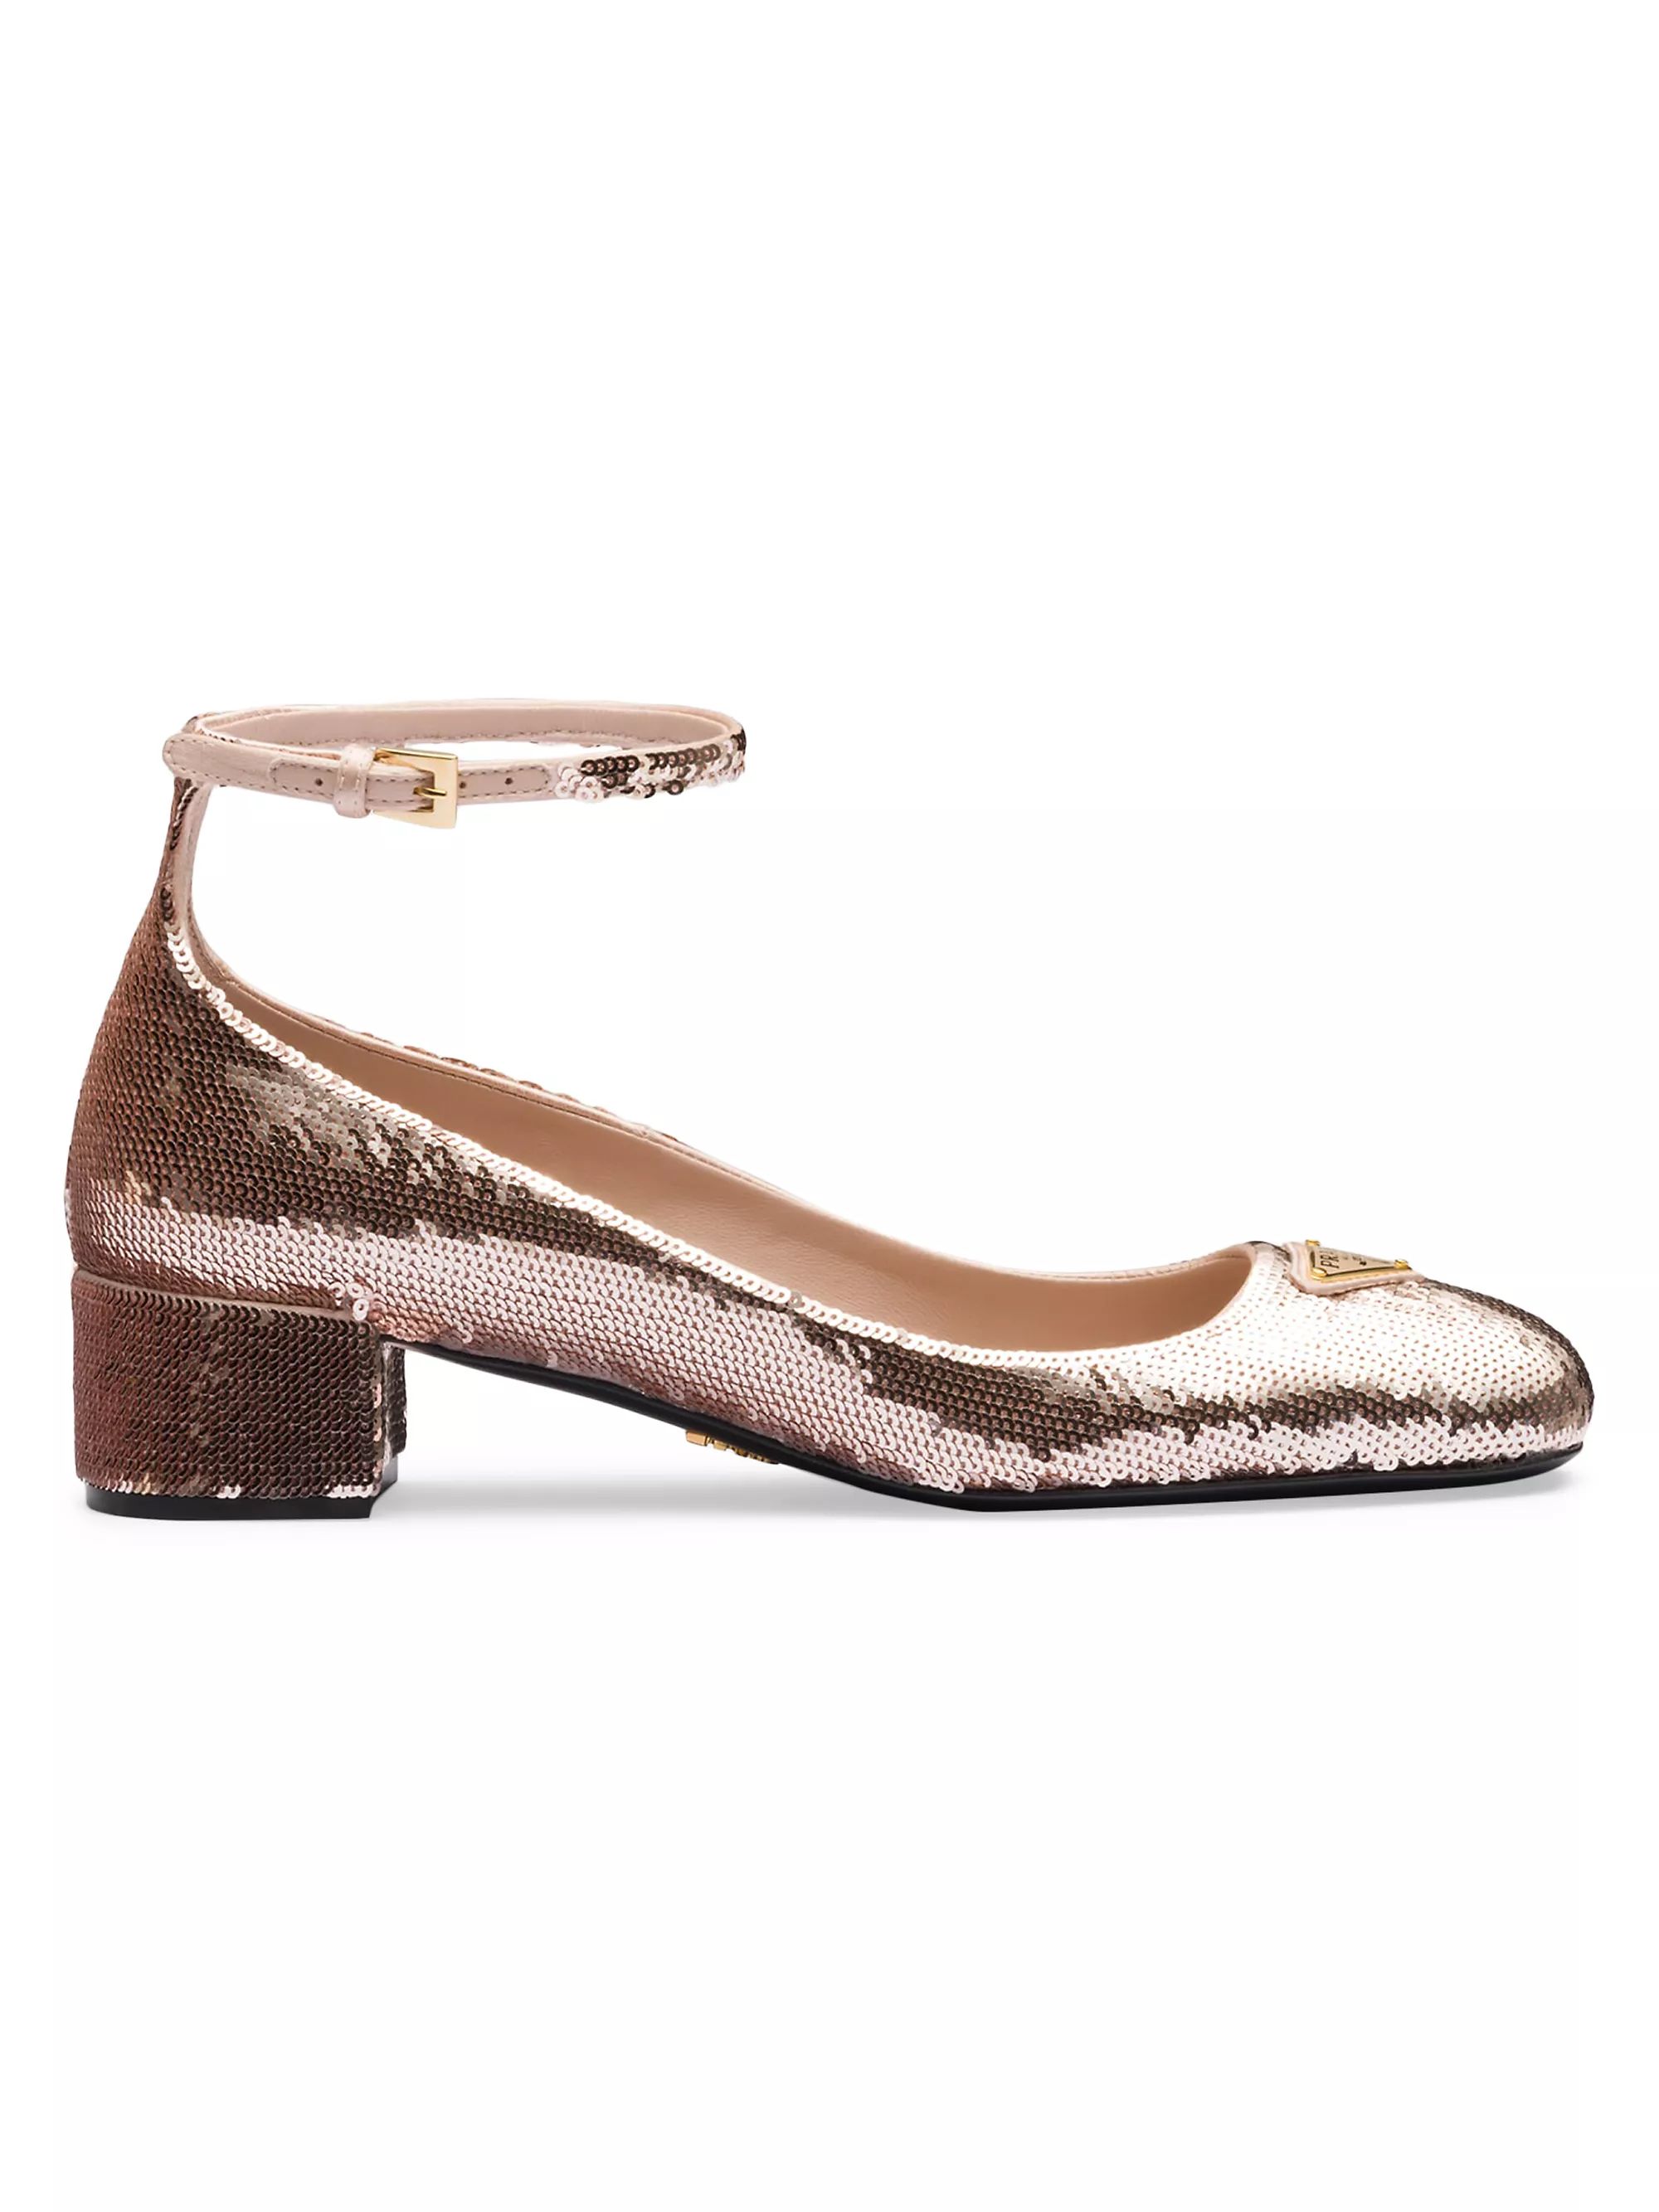 Sequined Satin Pumps | Saks Fifth Avenue